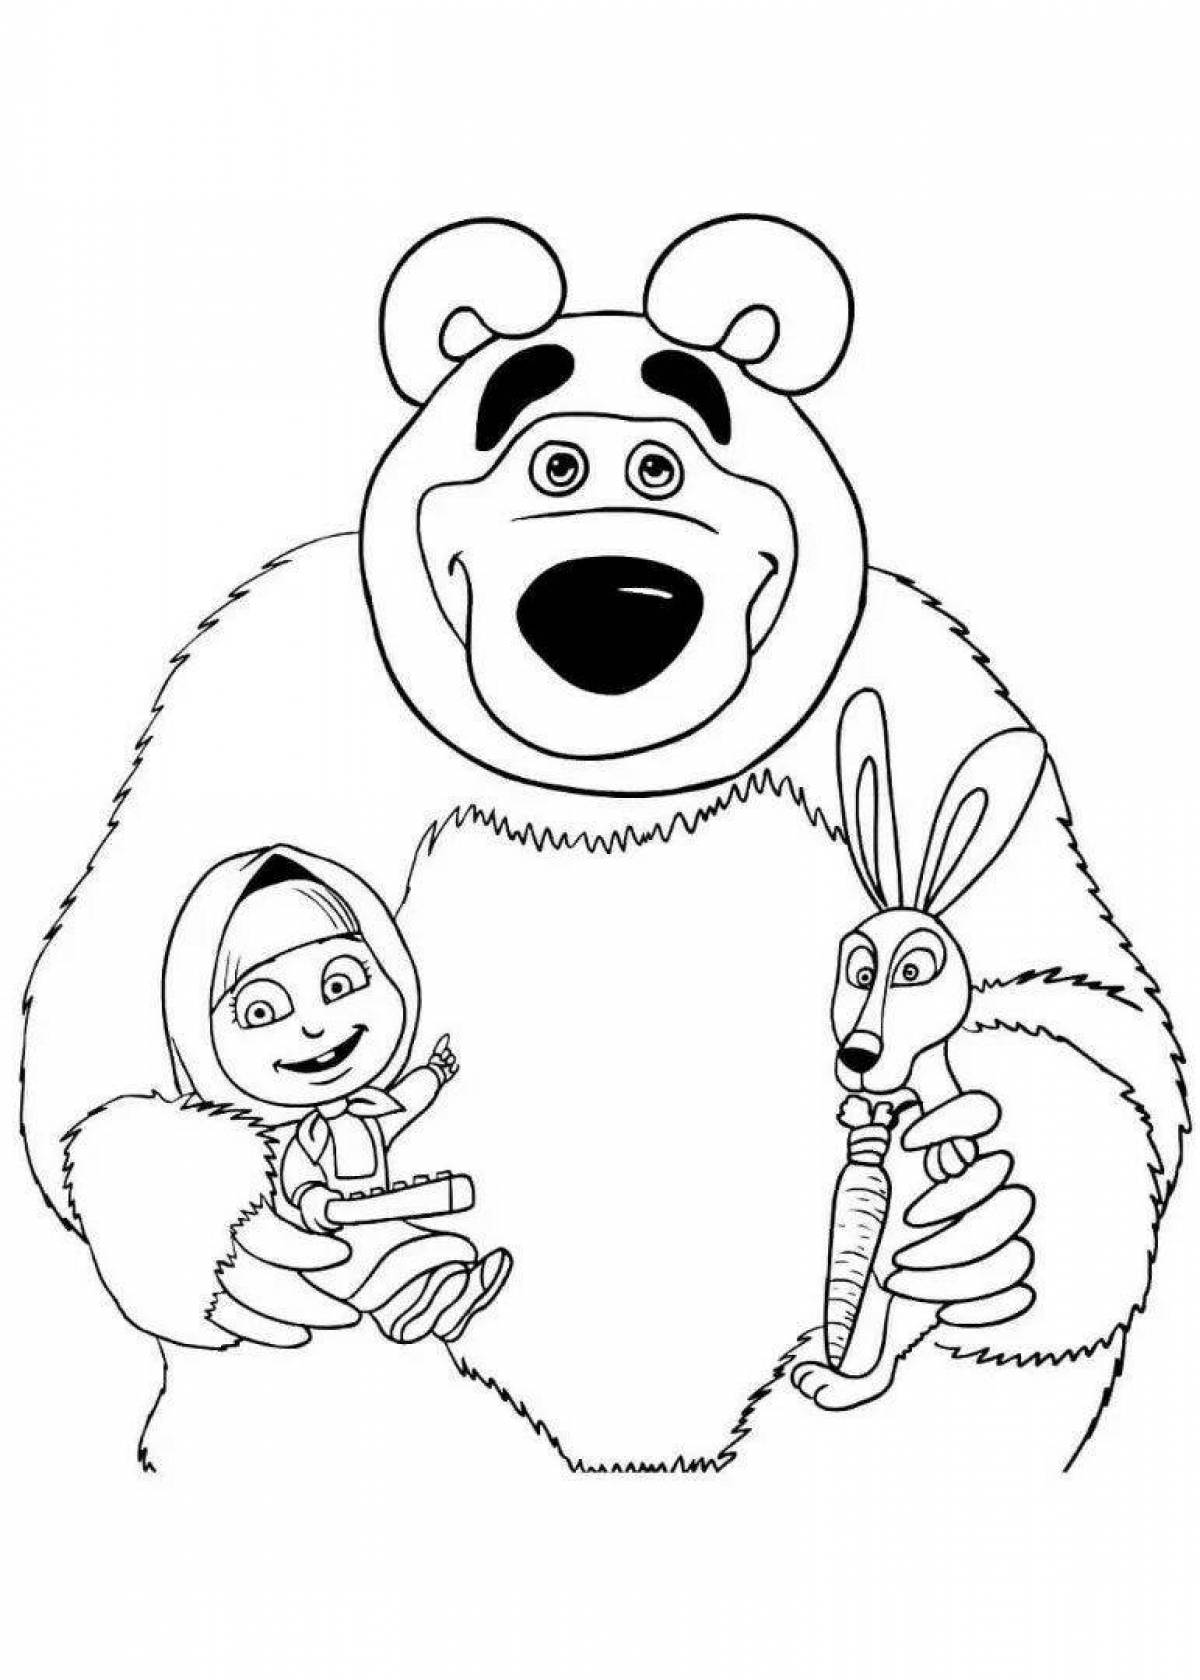 Funny coloring of a hare from a masha and a bear